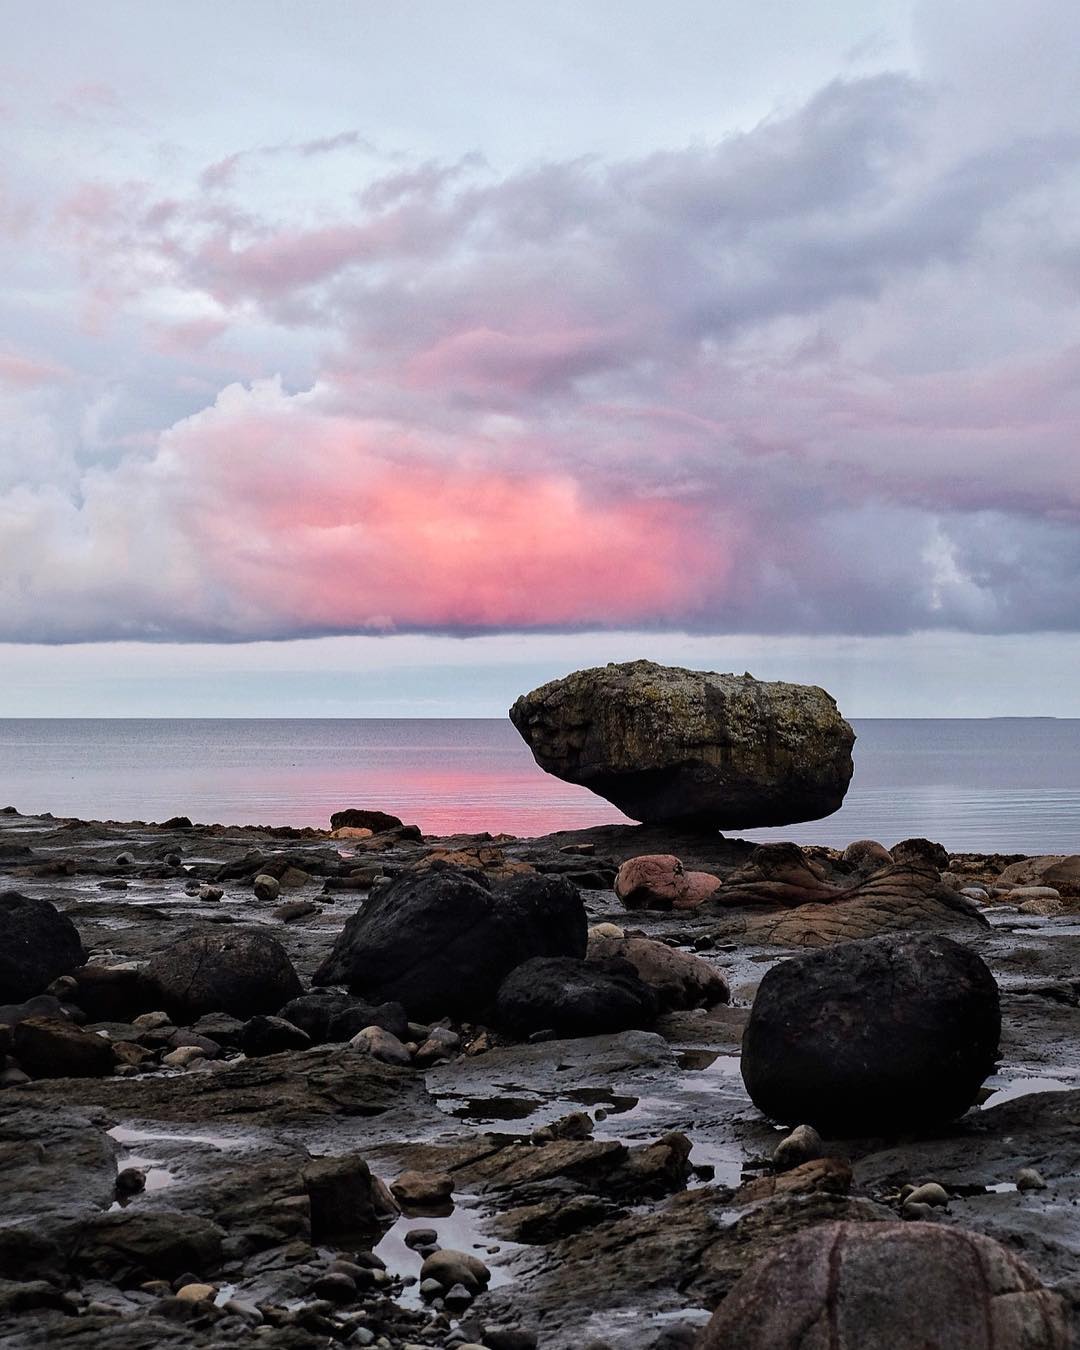 A large rock balances on a smaller rock on the beach at sunset. There are pink clouds in the sky.